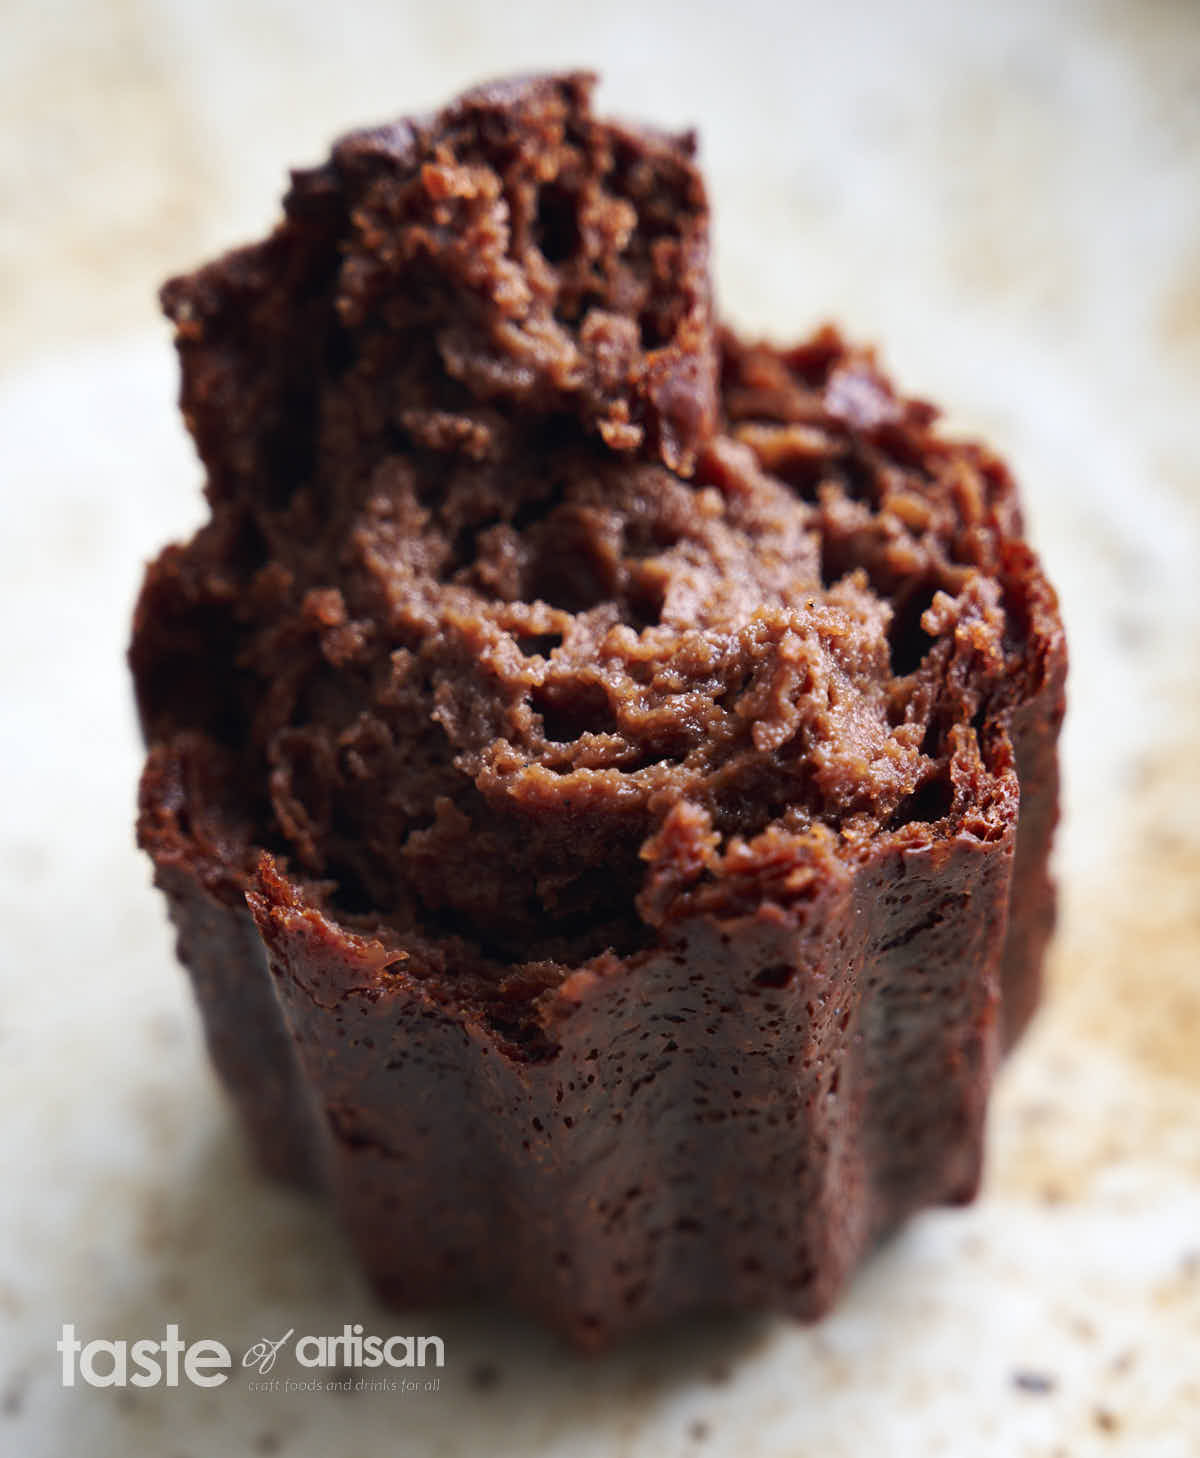 Creamy crumb of chocolate canele - an exquisite Bordeaux pastry.